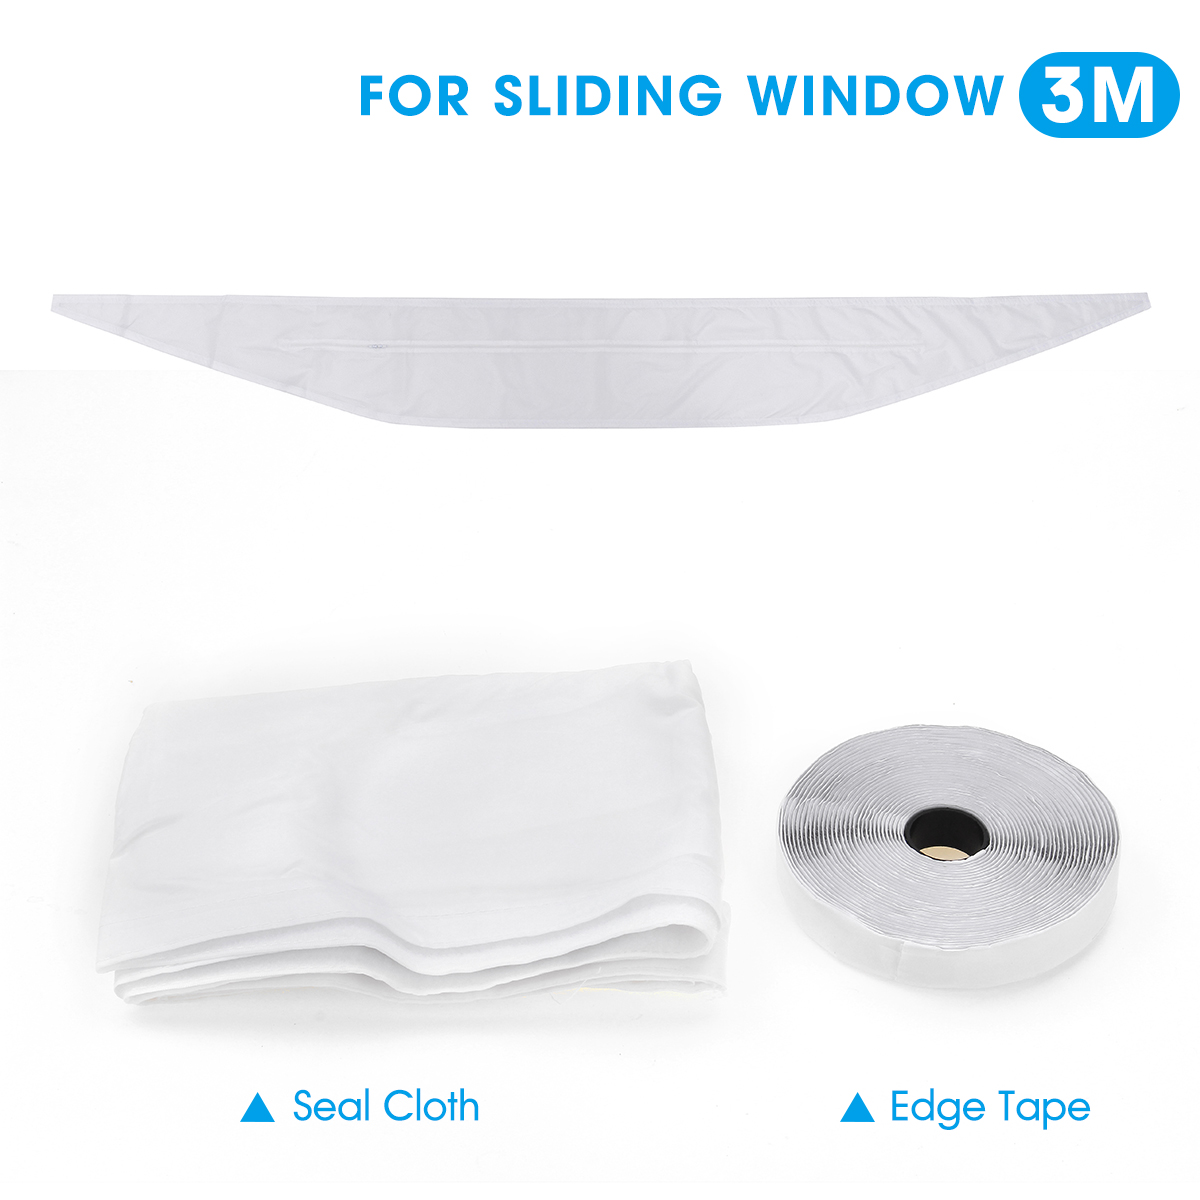 Window-Sliding-Door-Seal-Cloth-Air-Locking-with-Adhesive-Tape-For-Portable-Air-Conditioners-1483889-6